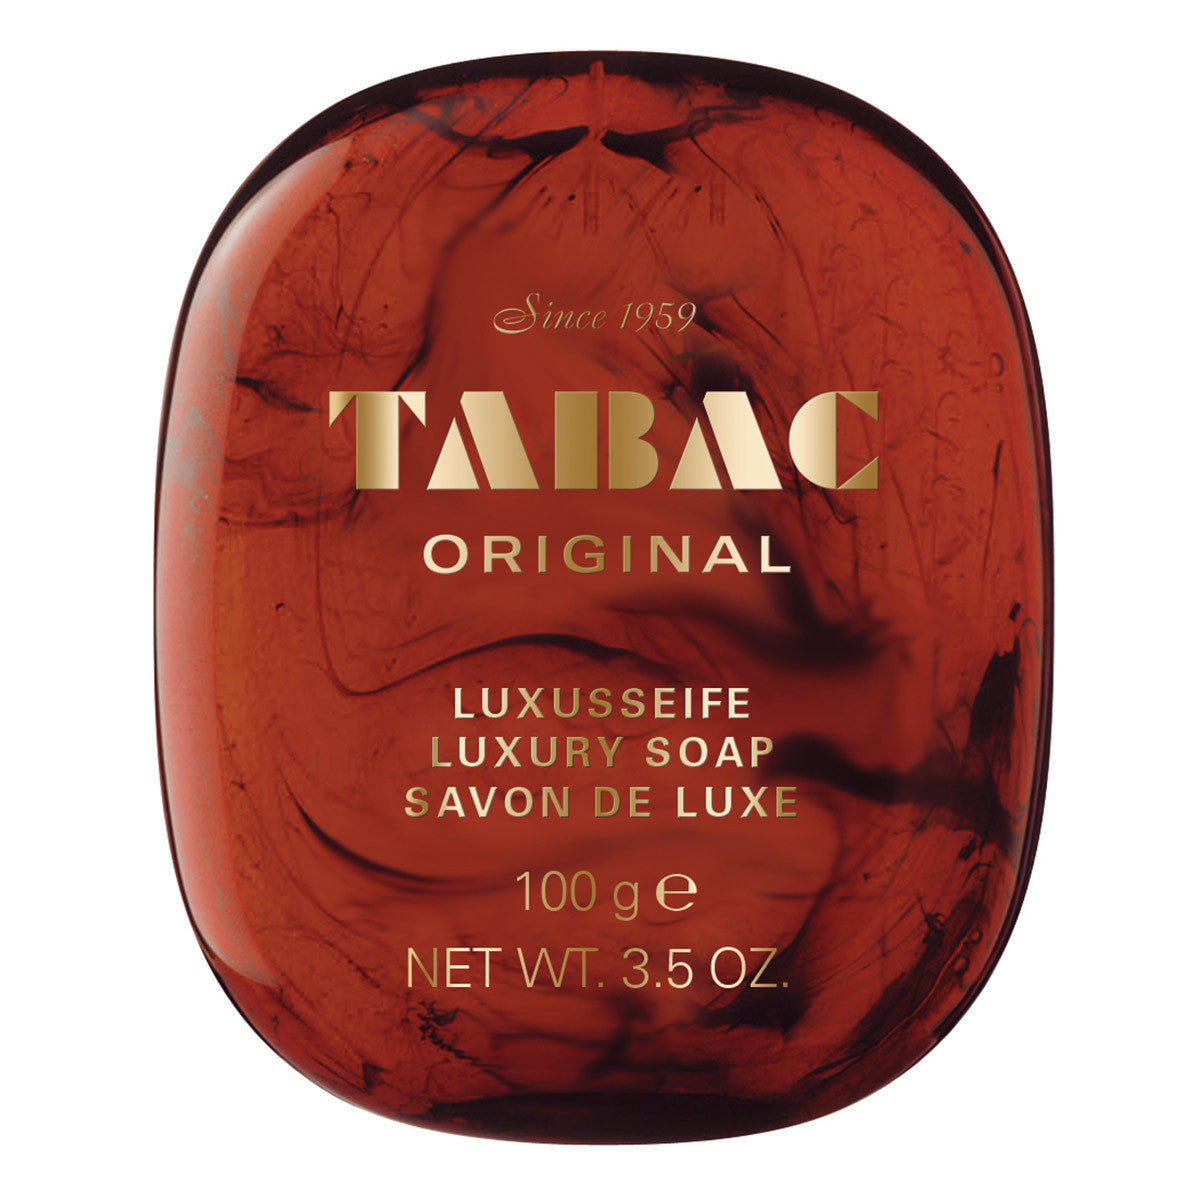 Primary image of Tabac Luxury Soap